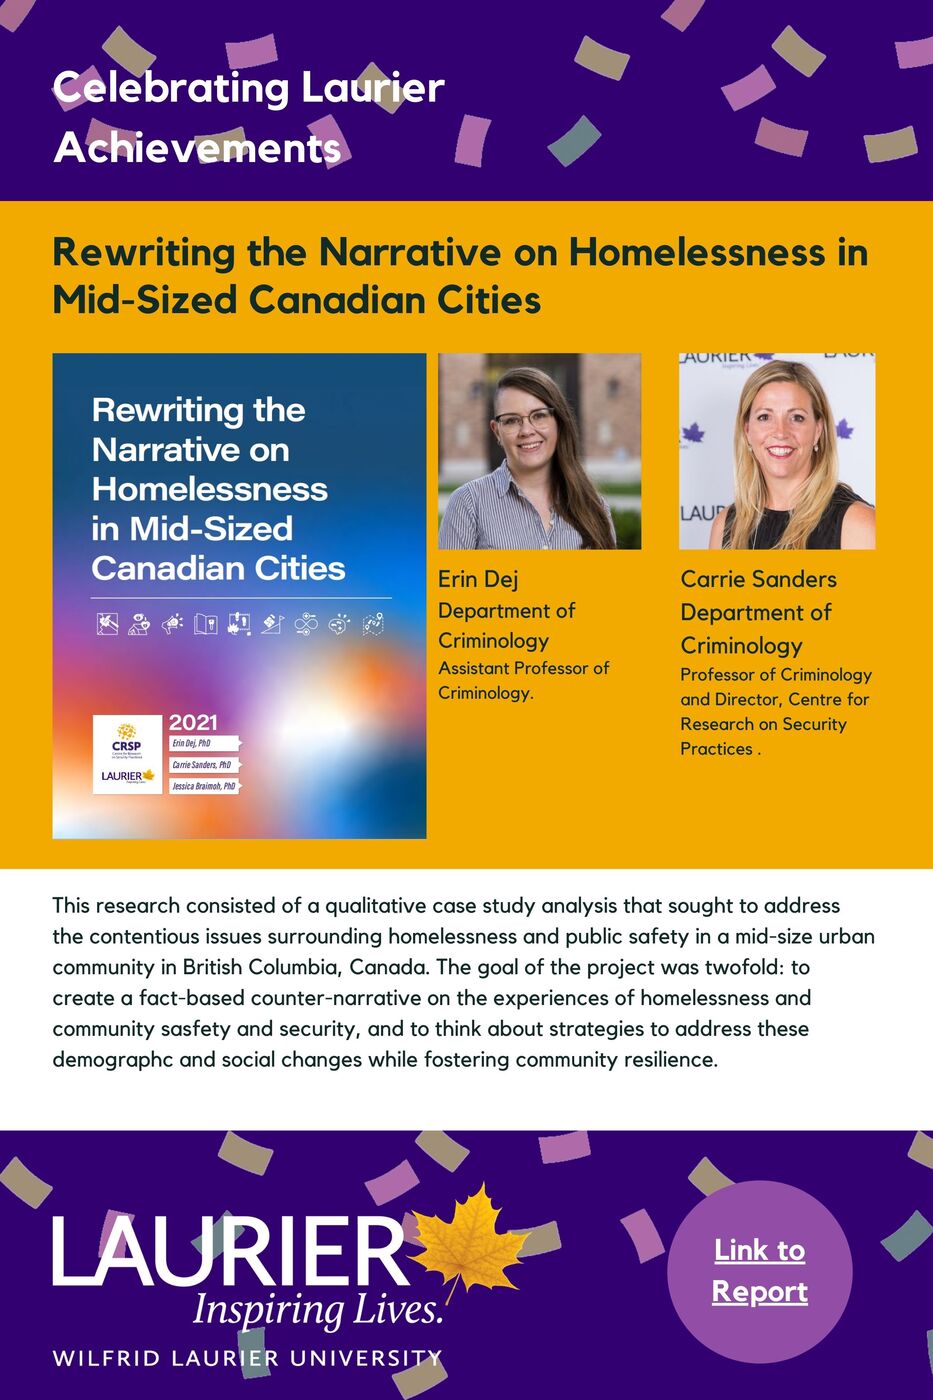 Rewriting the Narrative on Homelessness in Mid-Sized Canadian Cities promotional poster for the Celebrating Laurier Achievements program with a headshot of co-author Erin Dej.